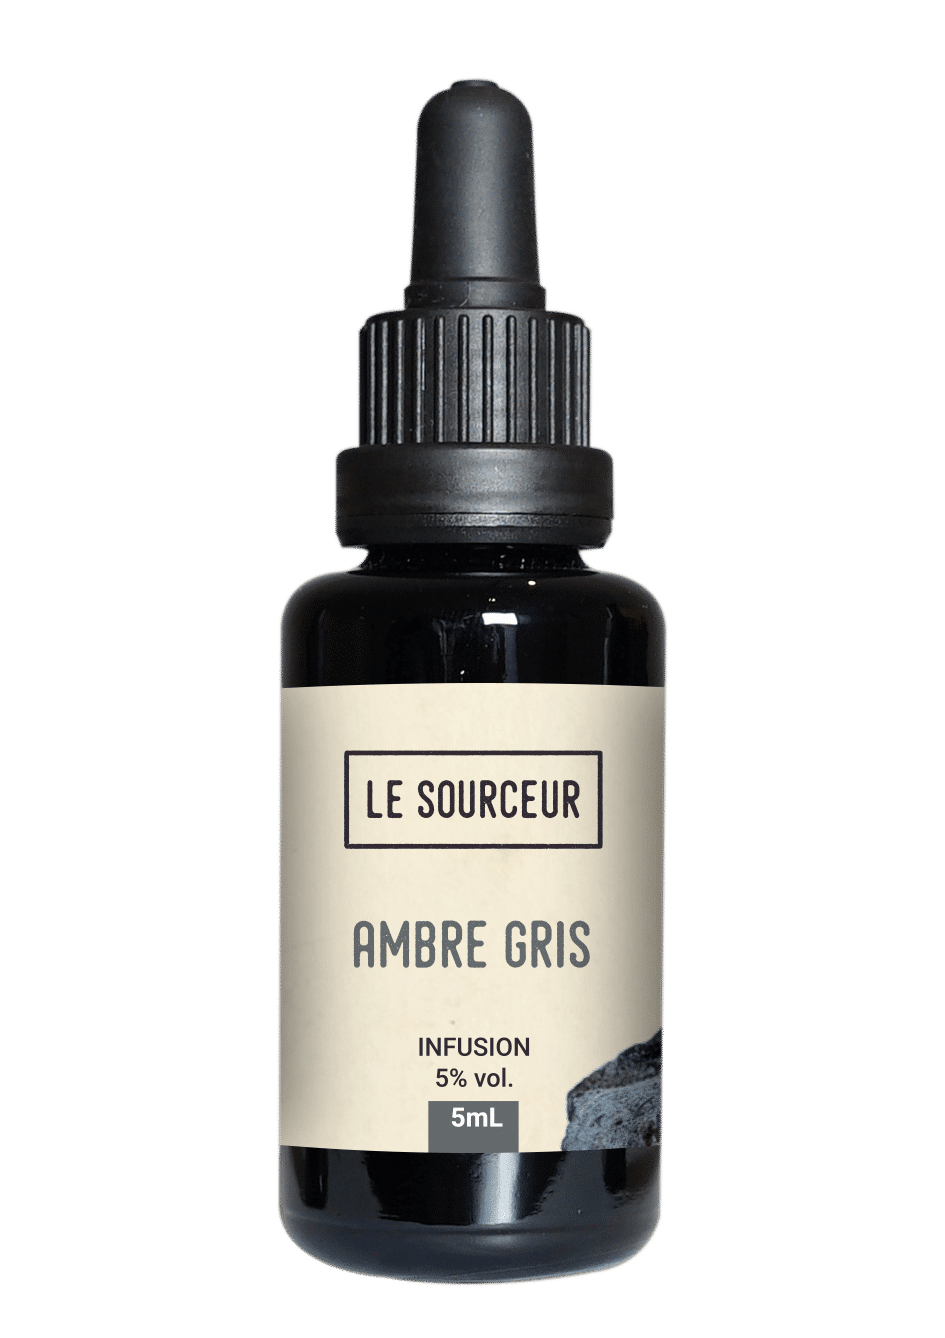 Ambergris Infusion bottle